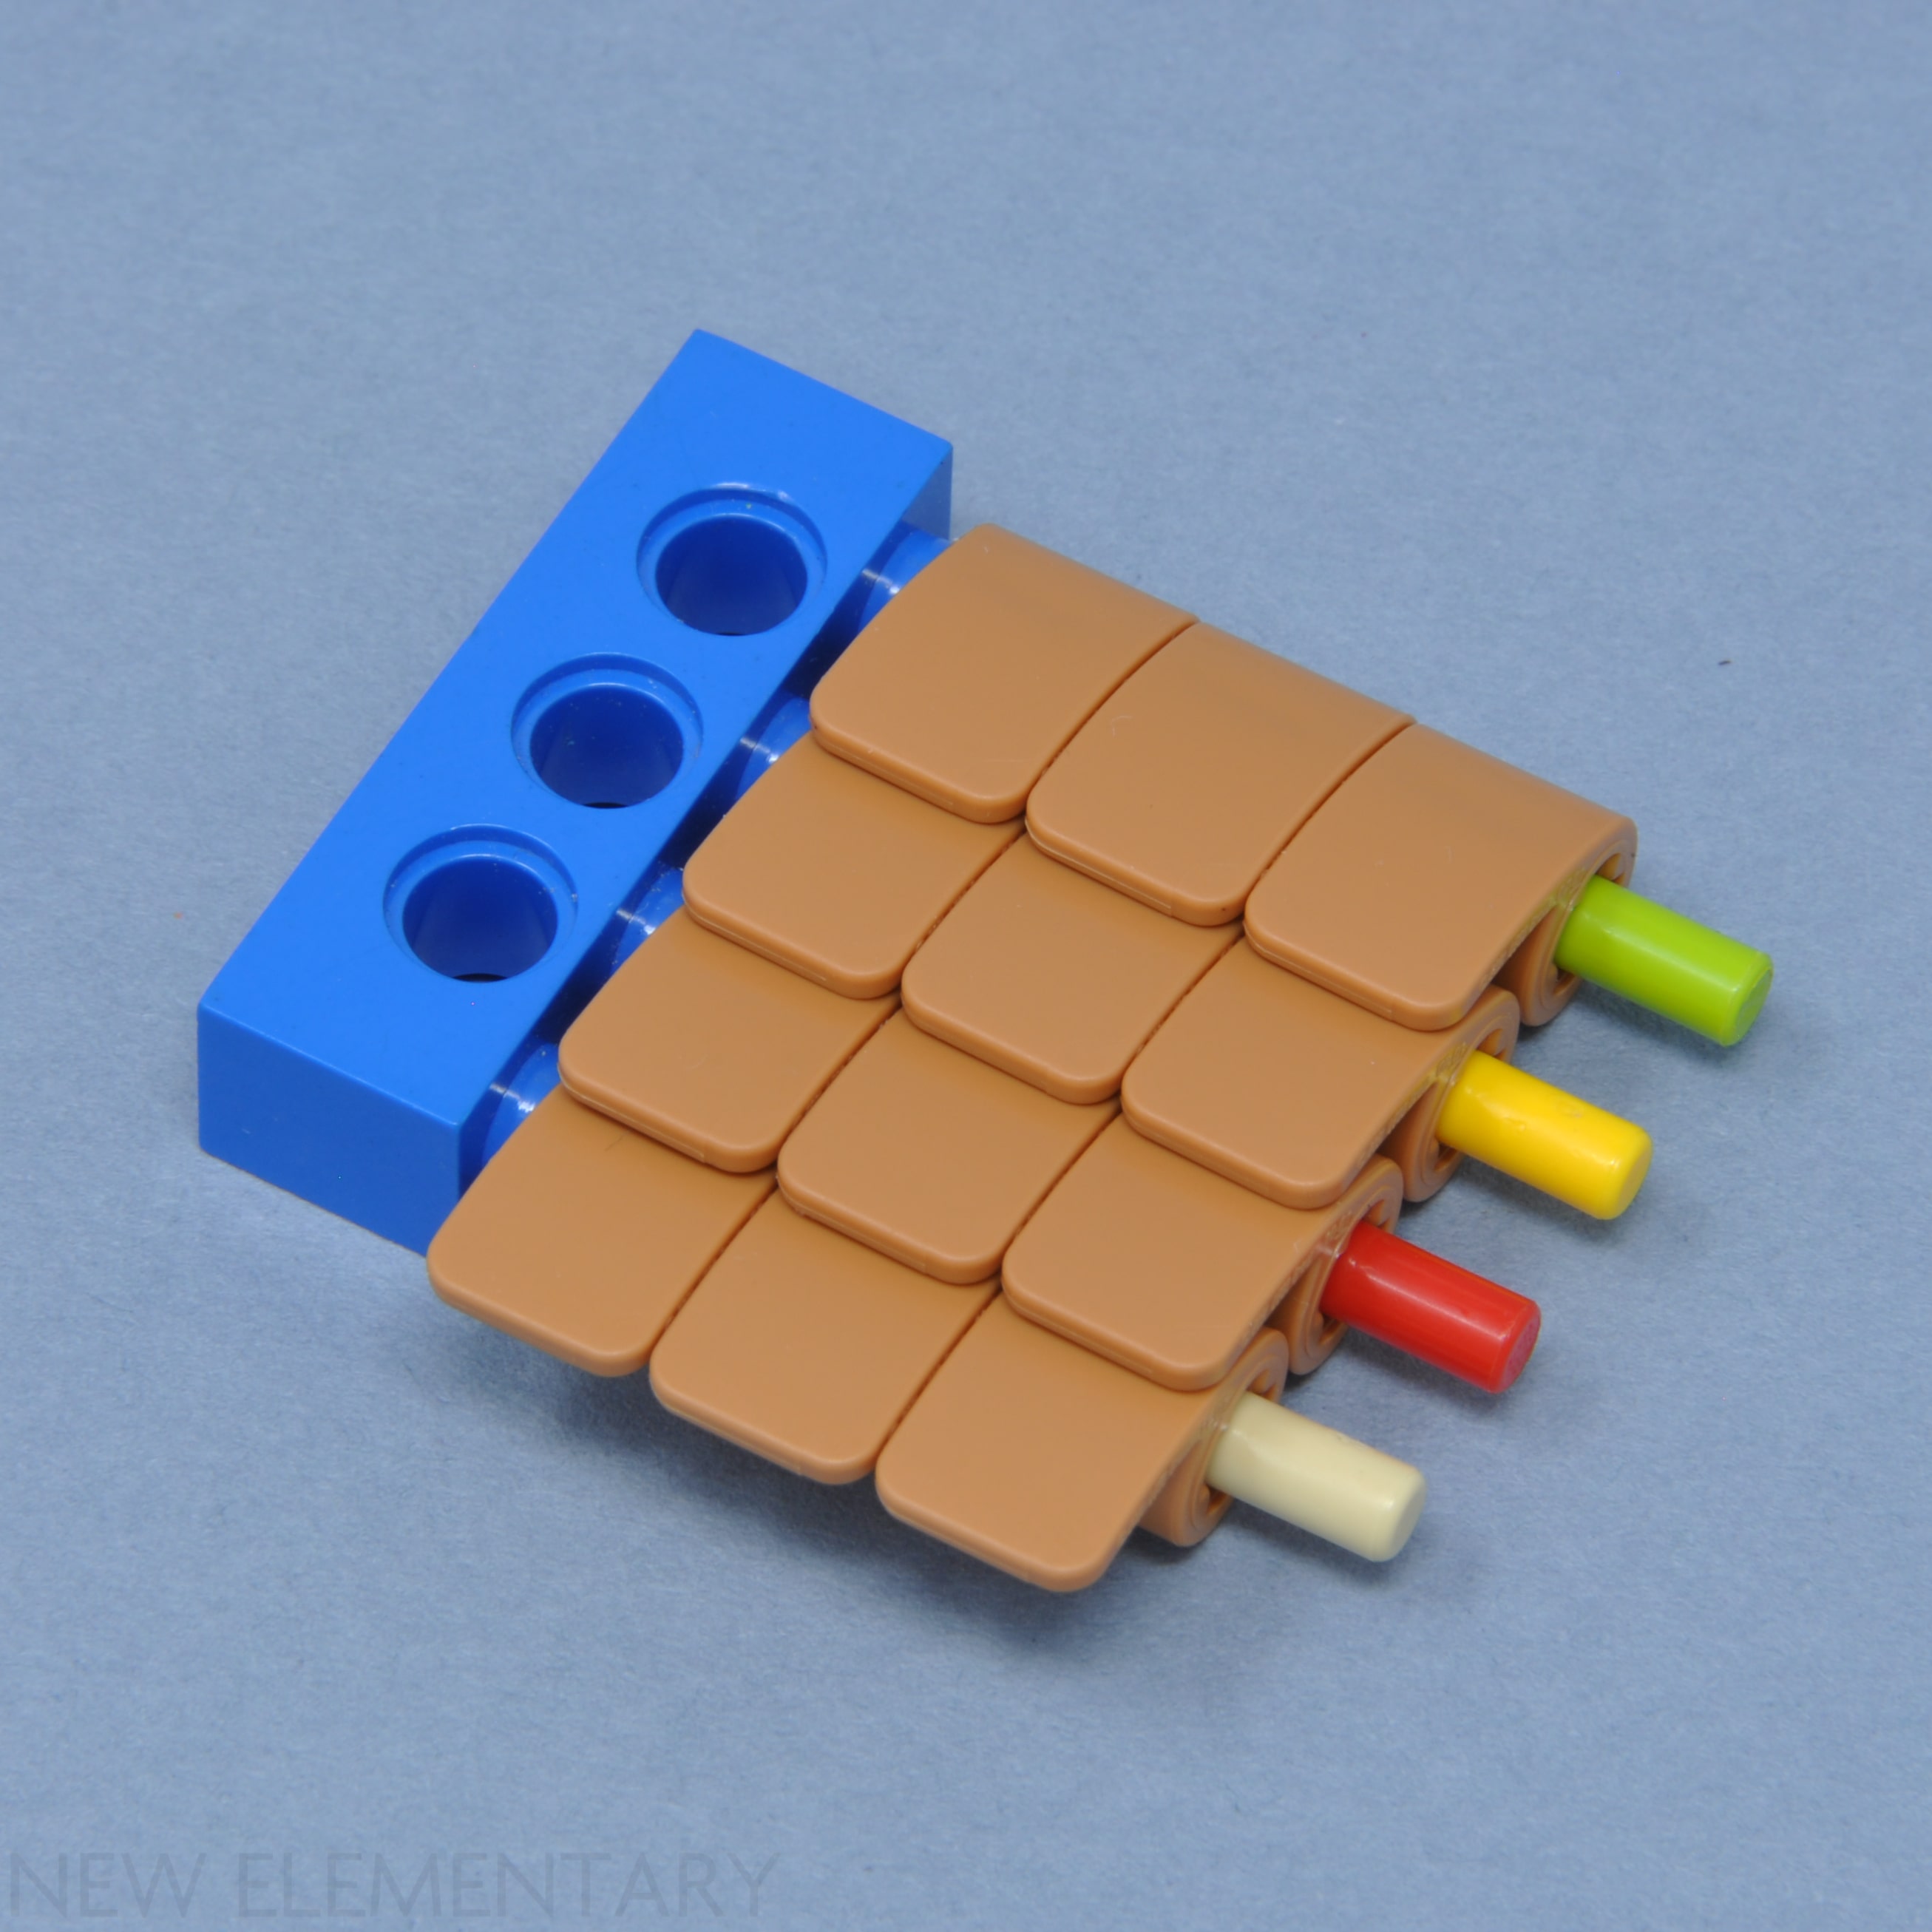 Brick, Modified 2 x 2 with Grooves and Axle Hole